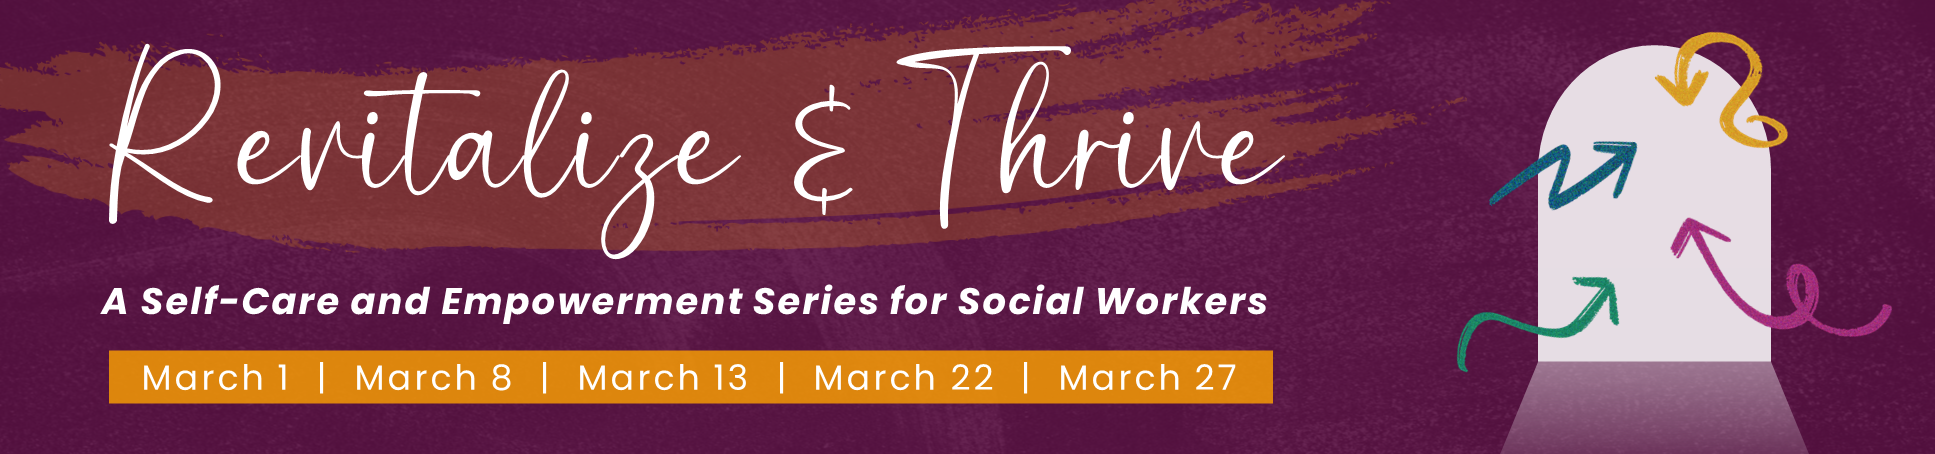 Revitalize and Thrive - A self-care and empowerment series for social workers